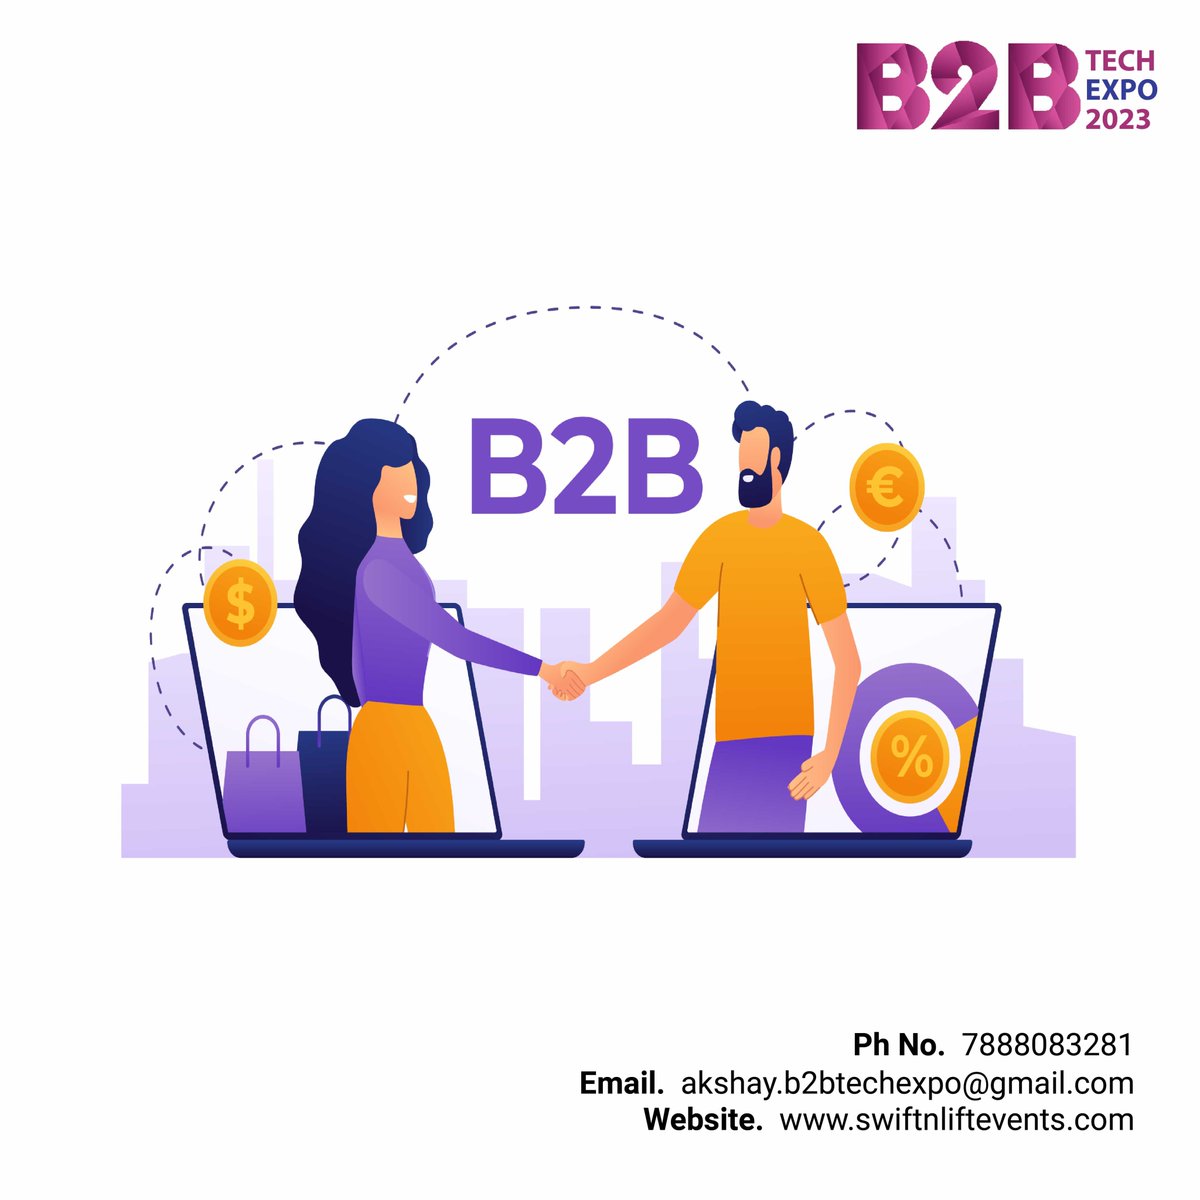 Pune 2023 B2B Tech Expo Paves the Path to Tomorrow's Tech Solutions.
08 | 09 | 11 | 12 December- 2023
Venue: New Agriculture College Ground, Shivaji Nagar, Pune 
swiftnliftevents.com/b2b-tech-expo/
#Pune2023 #B2BTechExpo #TechSolutions2023 #TomorrowTech #PuneTechExpo #B2BExpo #TechDemo